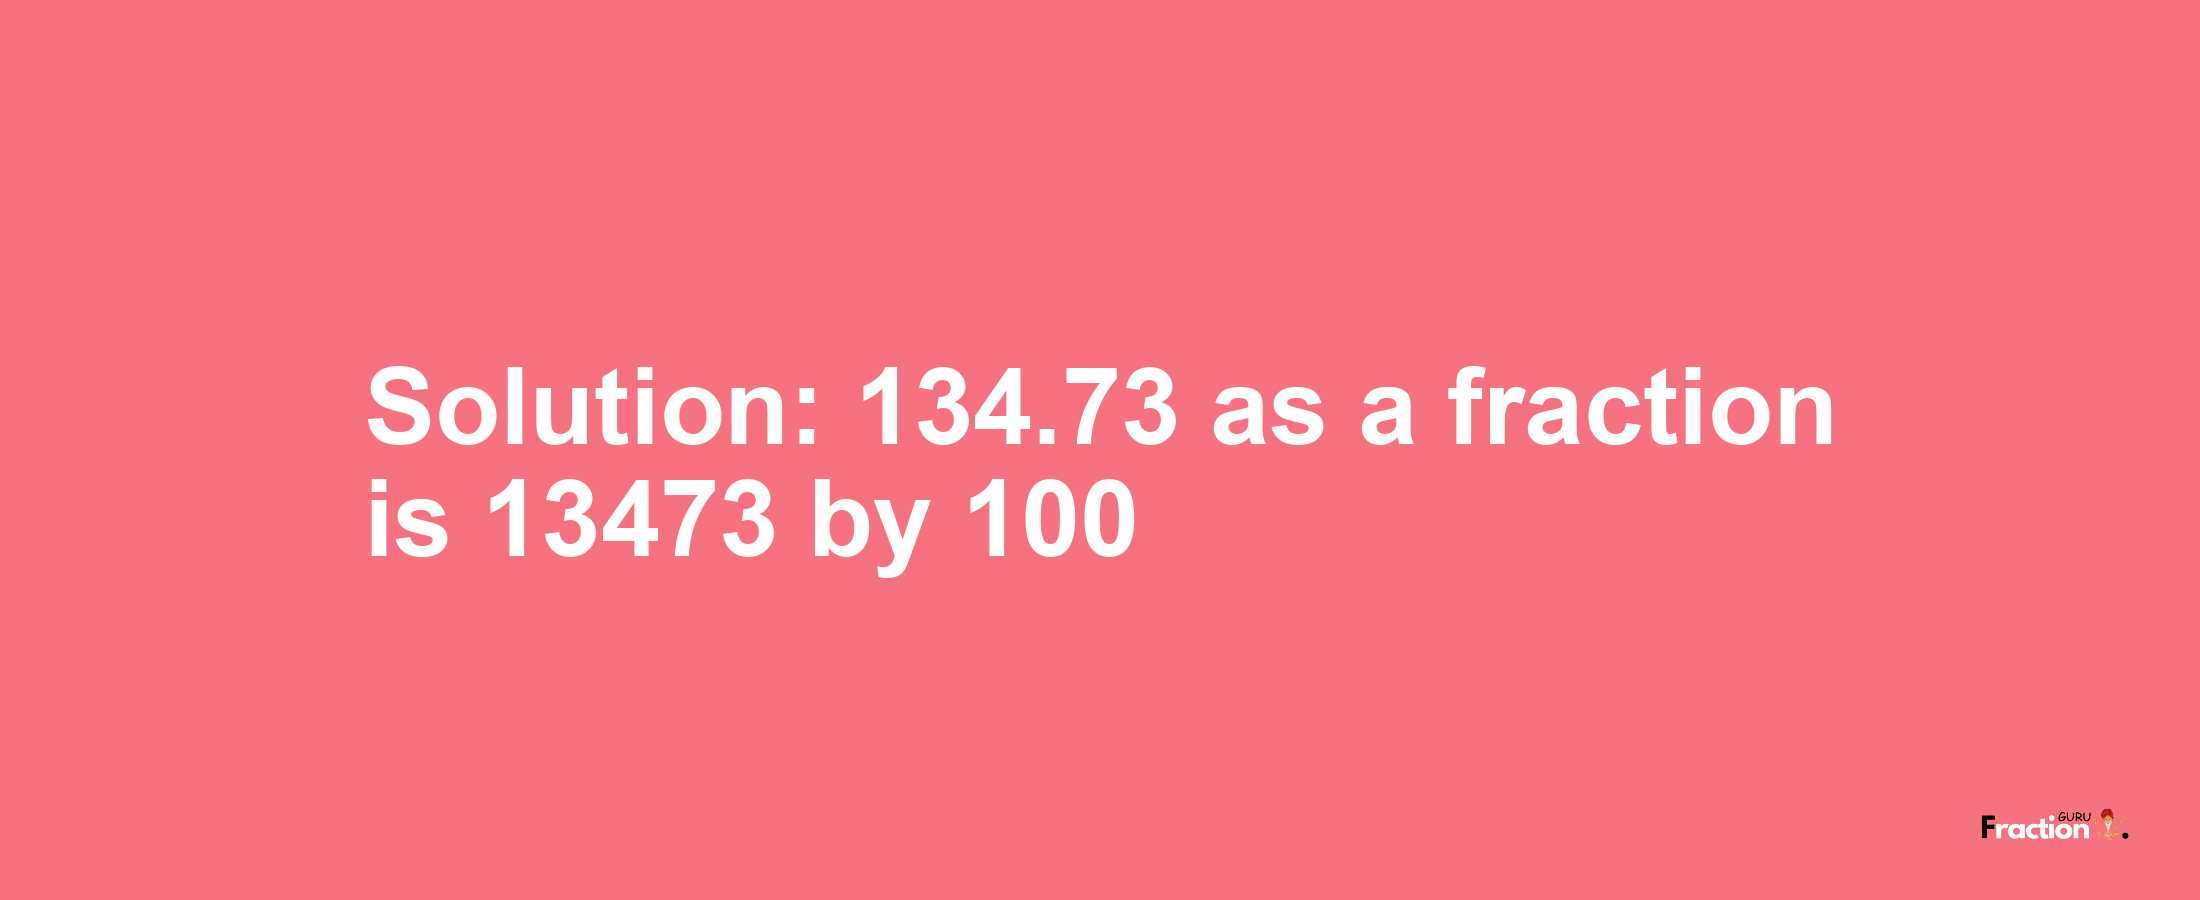 Solution:134.73 as a fraction is 13473/100